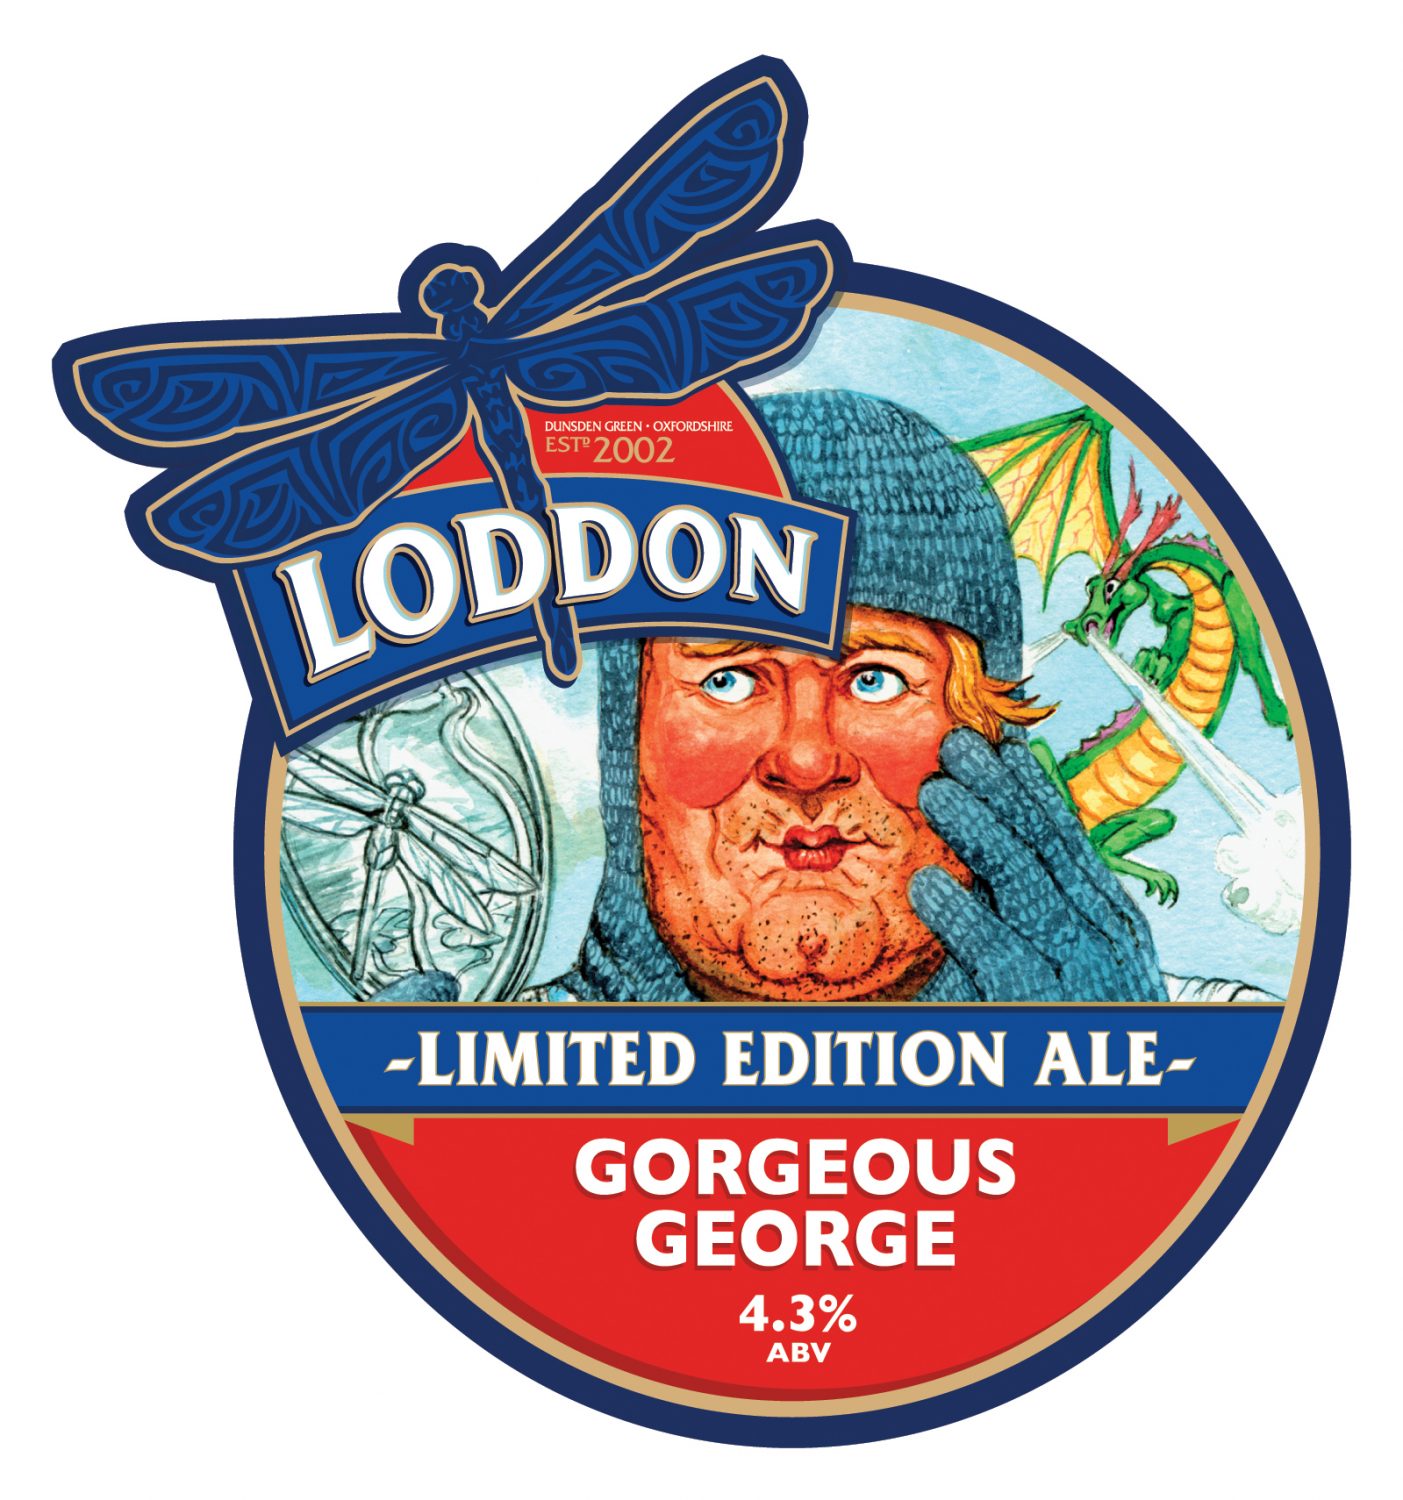 Loddon Brewery Limited Edition Ale - Gorgeous George